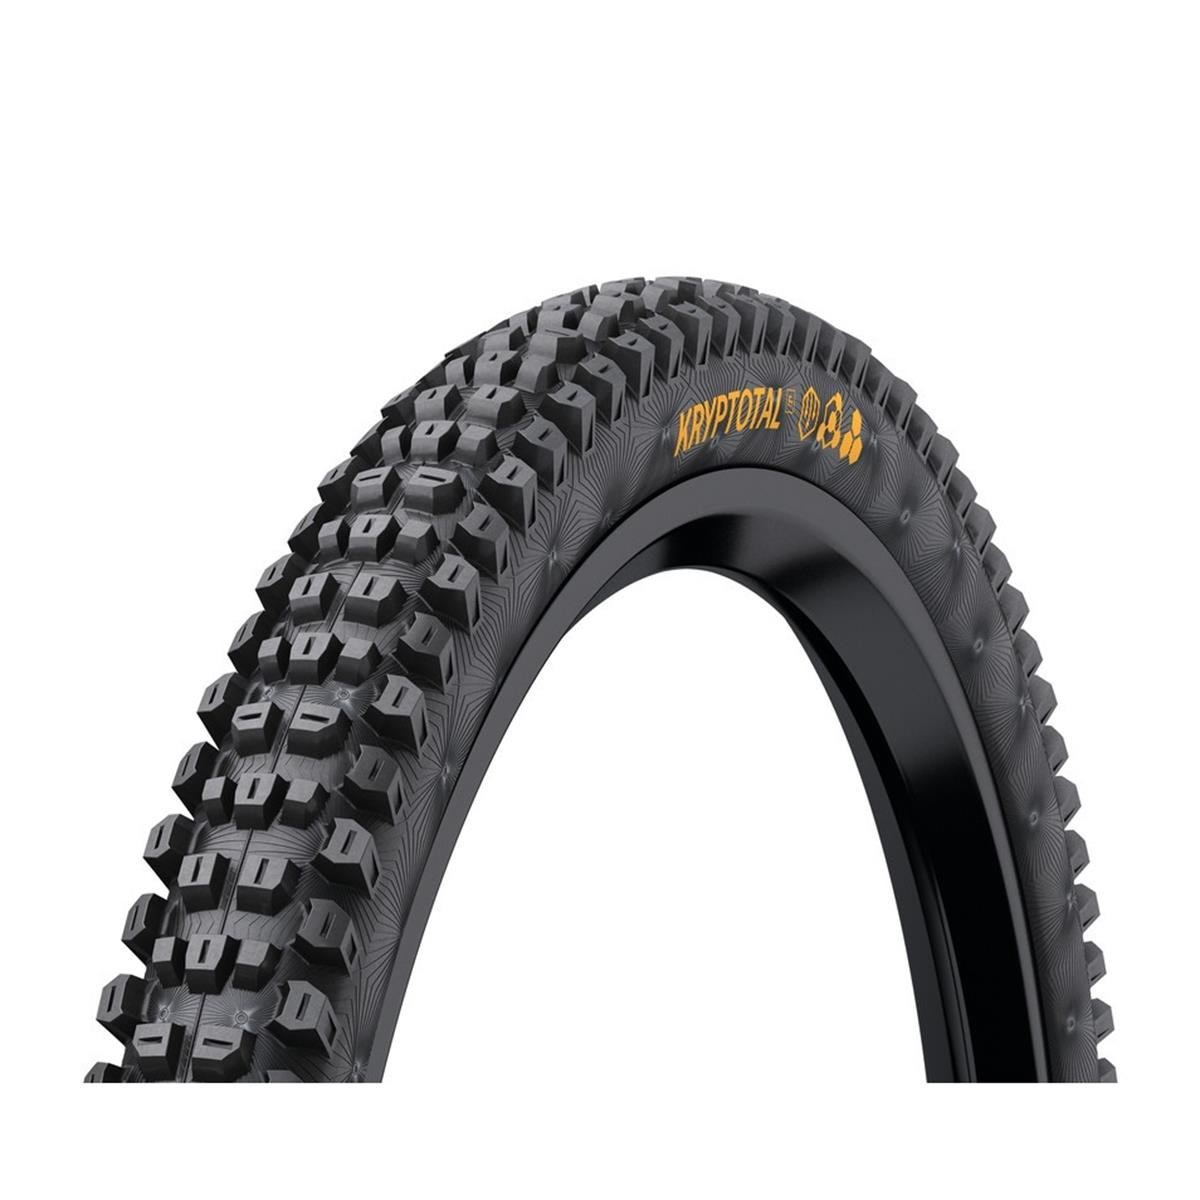 Continental MTB Tire Kryptotal Front DH 27.5 x 2.4, DH-Casing, Super Soft-Compound, TR